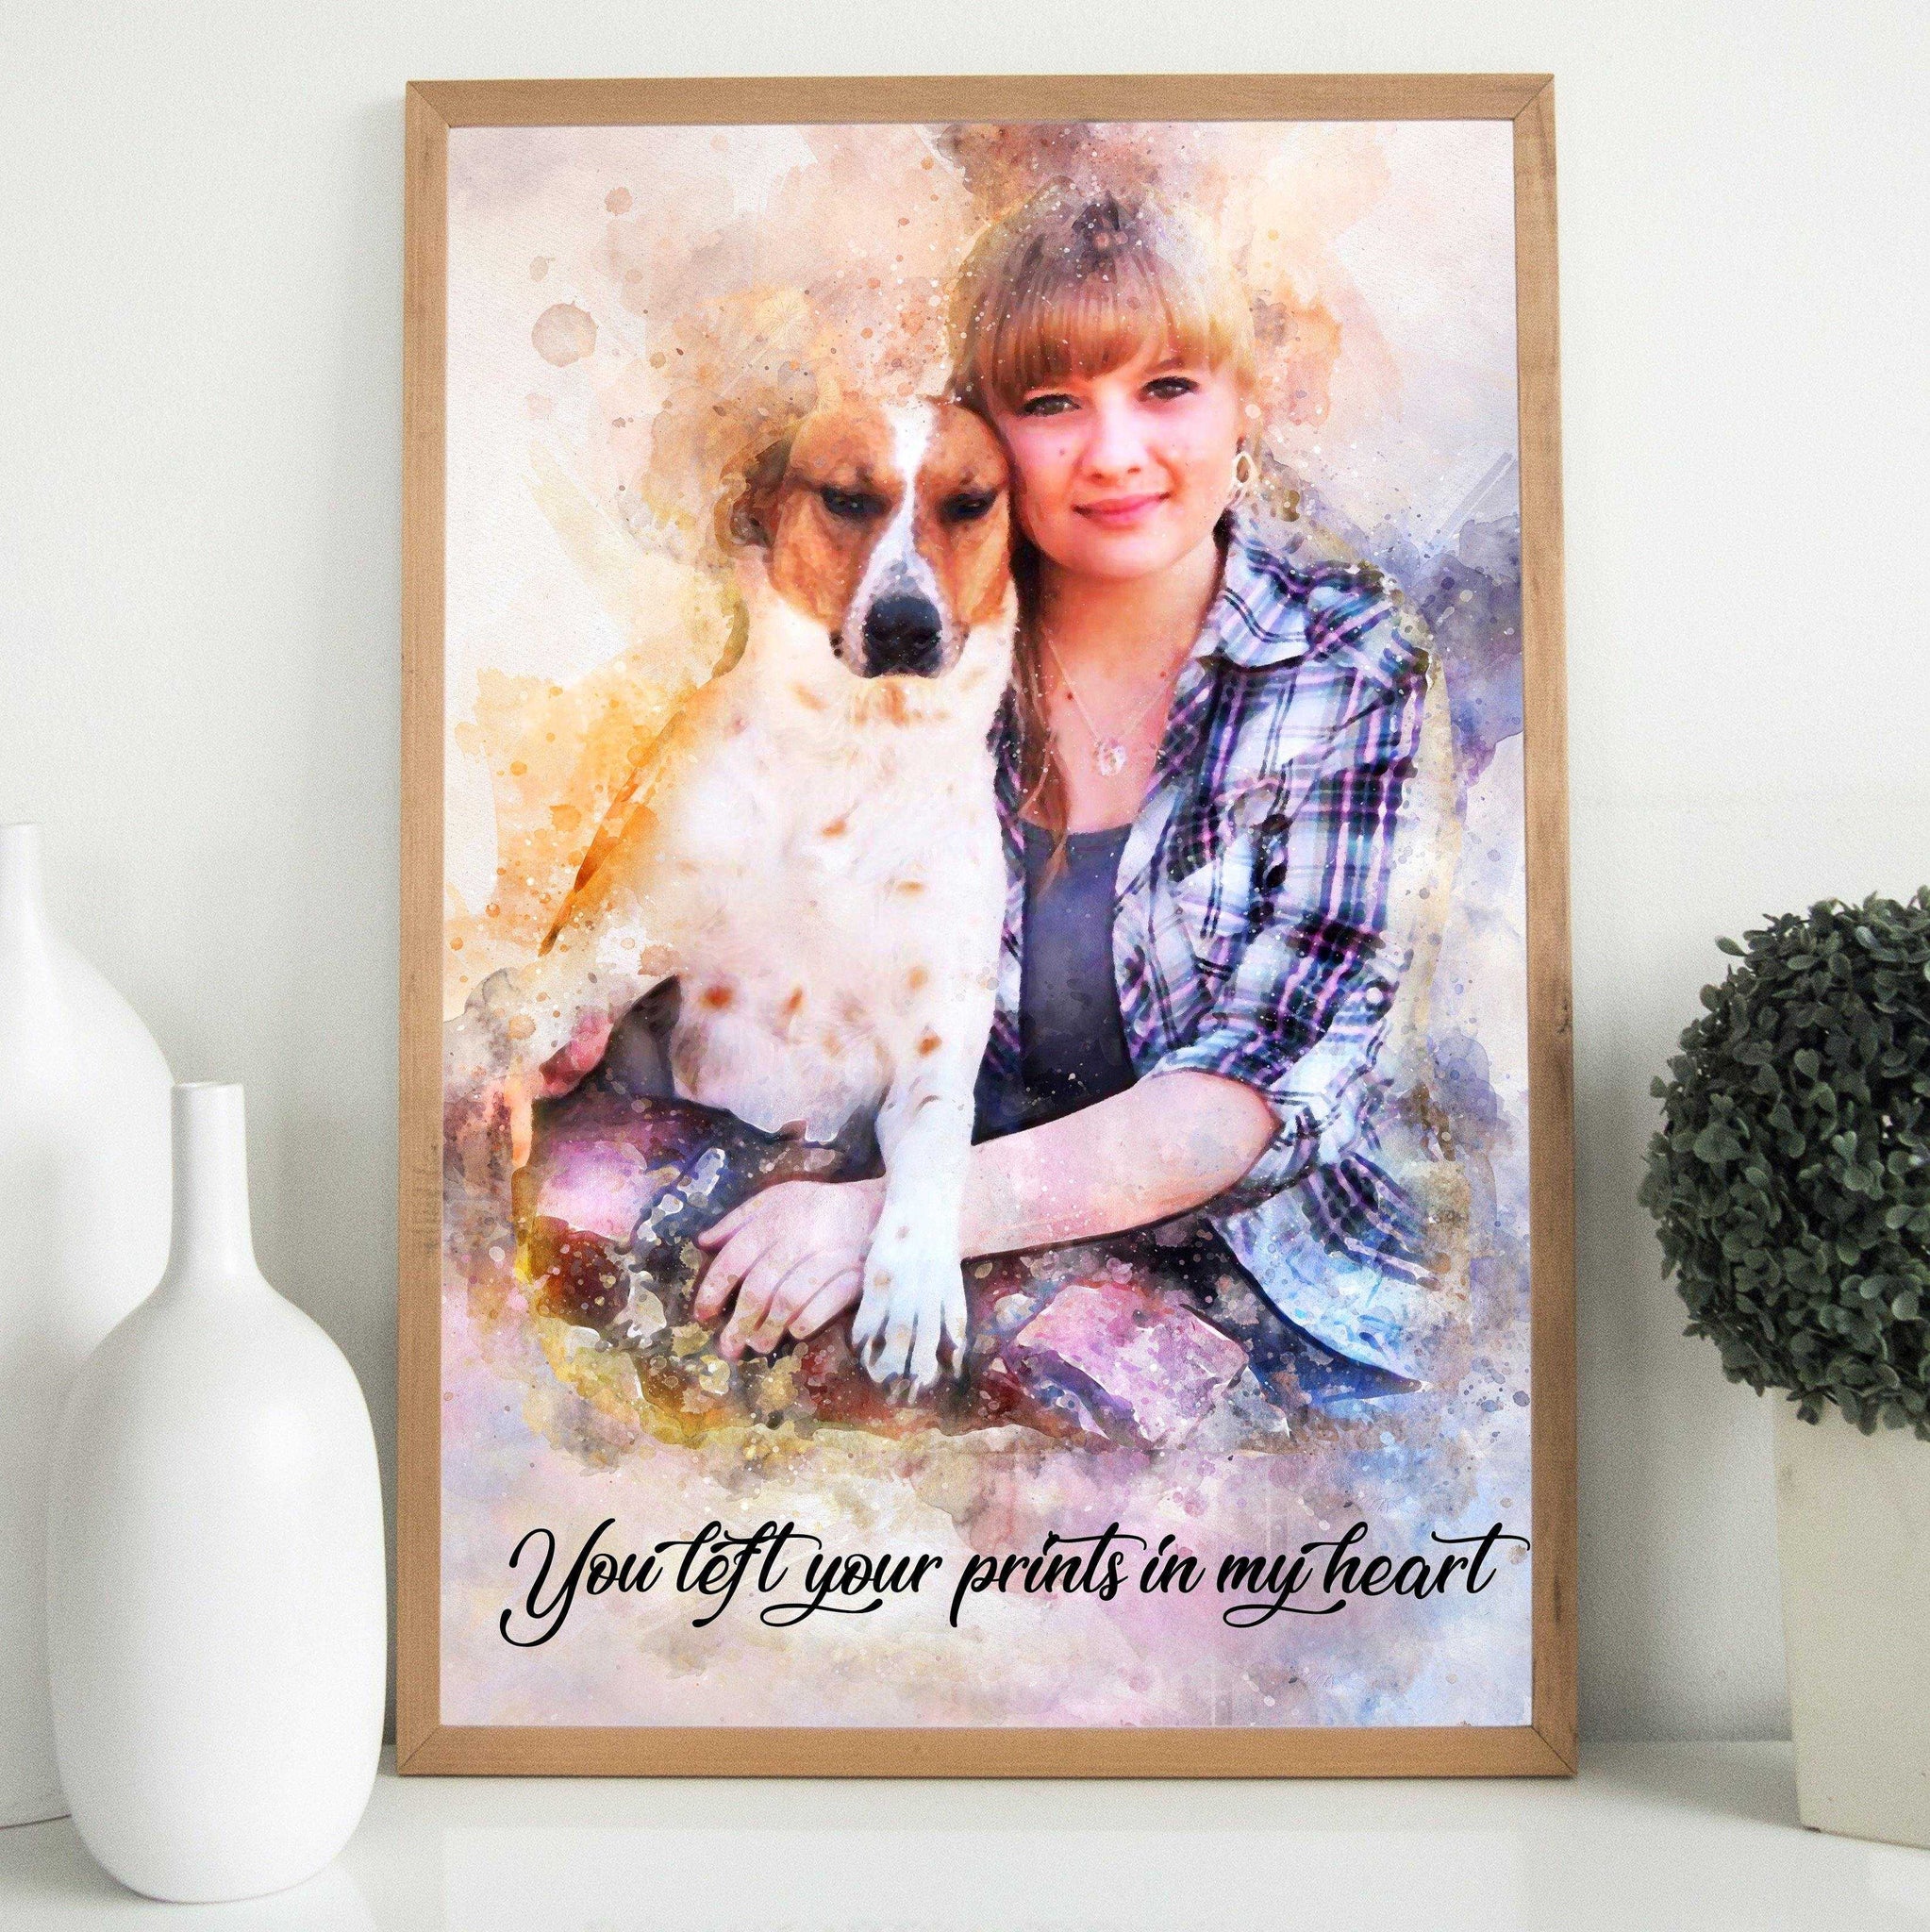 Customized Dog Art, Personalized Dog Art Painted on Canvas - FromPicToArt